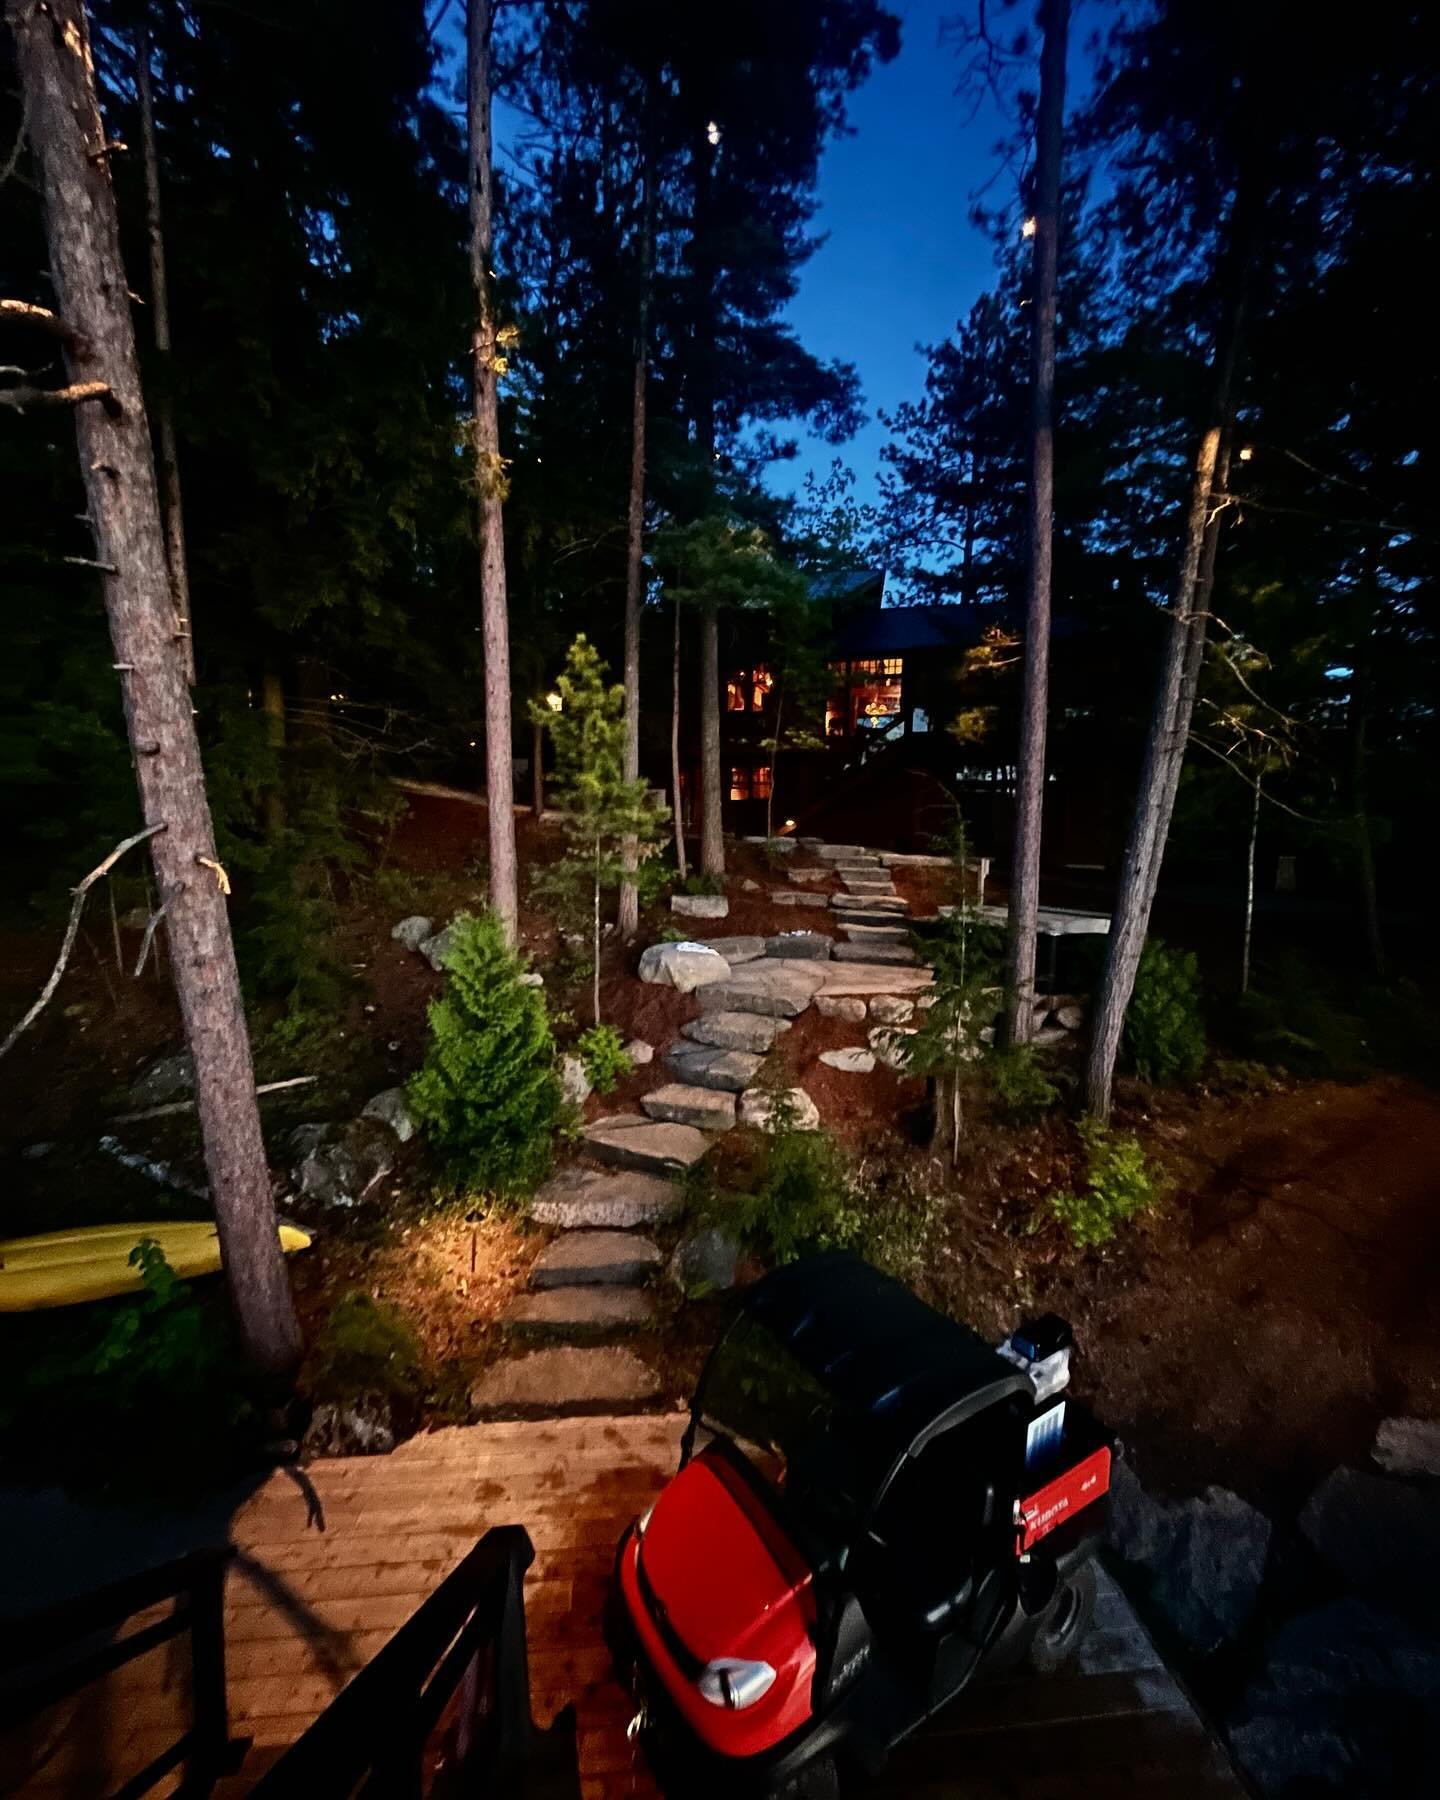 ✨ Golden hour magic on Lake Rosseau ✨

@canoe.stonescape captured this serene moment as the sun dipped below the horizon, casting a golden glow over these natural stone steps leading to a cozy island cottage. The soft down lighting from the majestic 